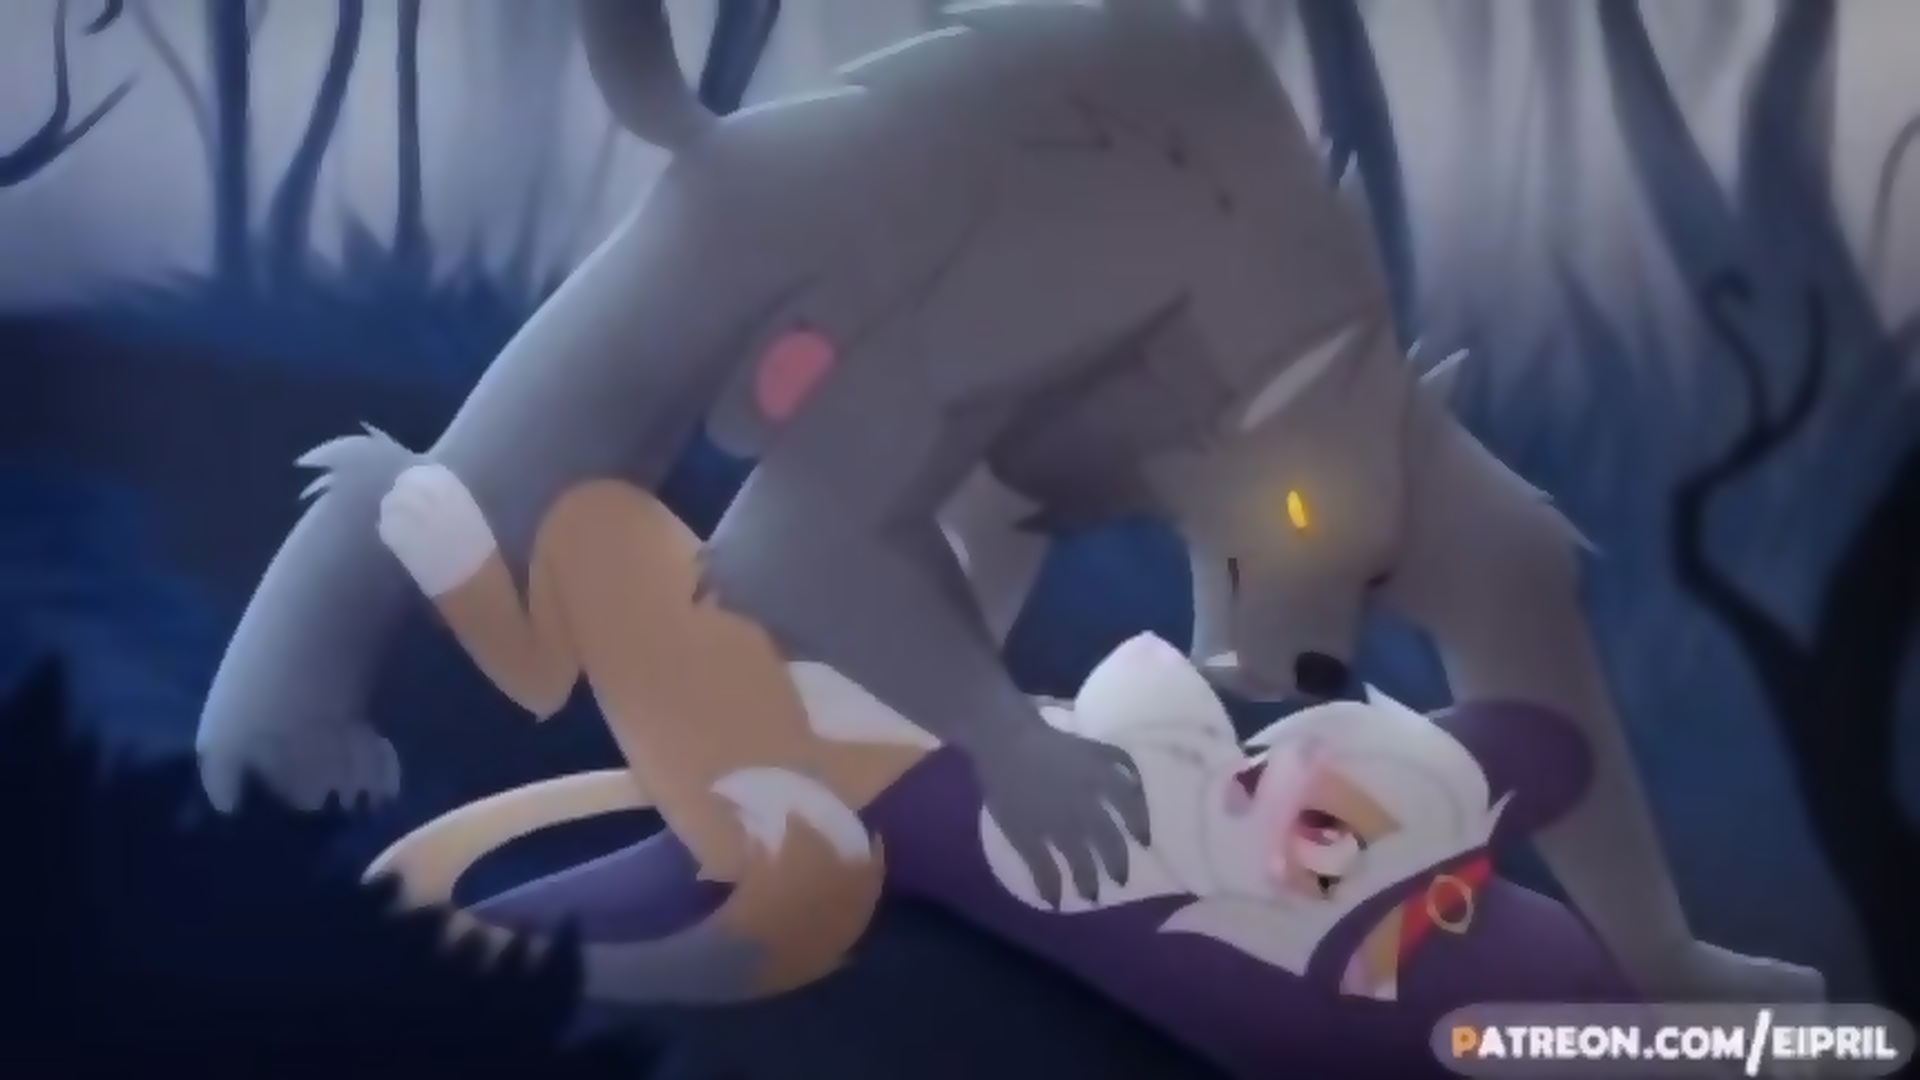 Anime Furry Trap Porn - Wrong Way (Furry Yiff) - ANIMATED - EPORNER